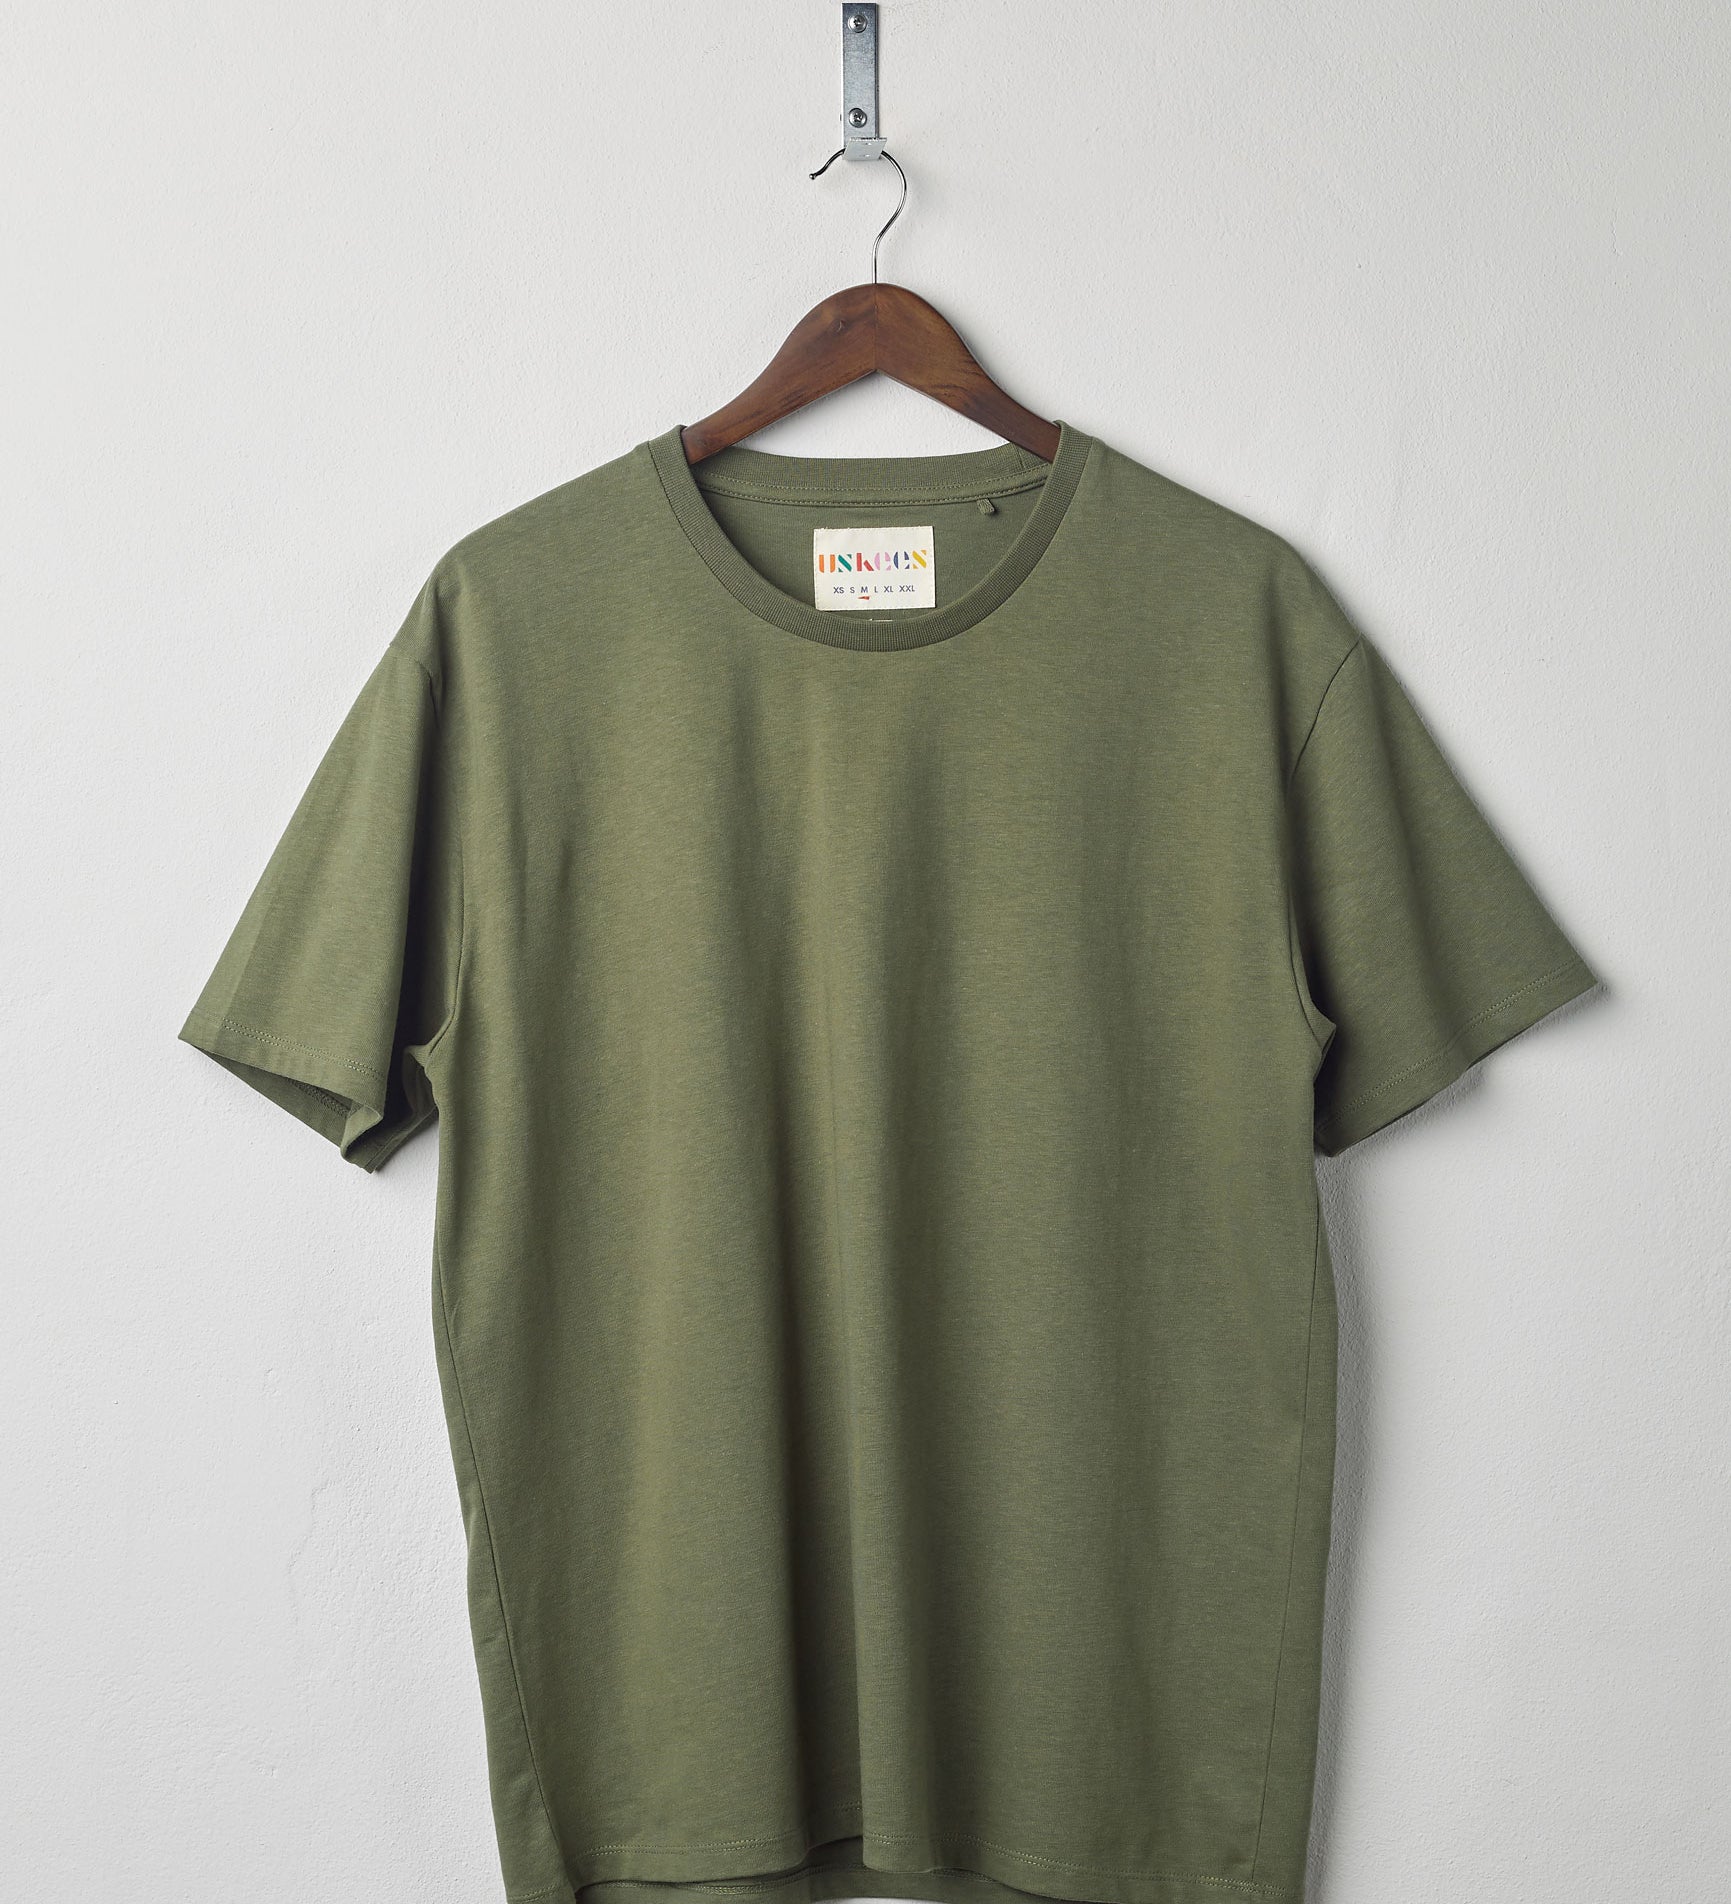 Front view of army green organic cotton #7006 jersey T-shirt by Uskees, presented on hanger against white background. 